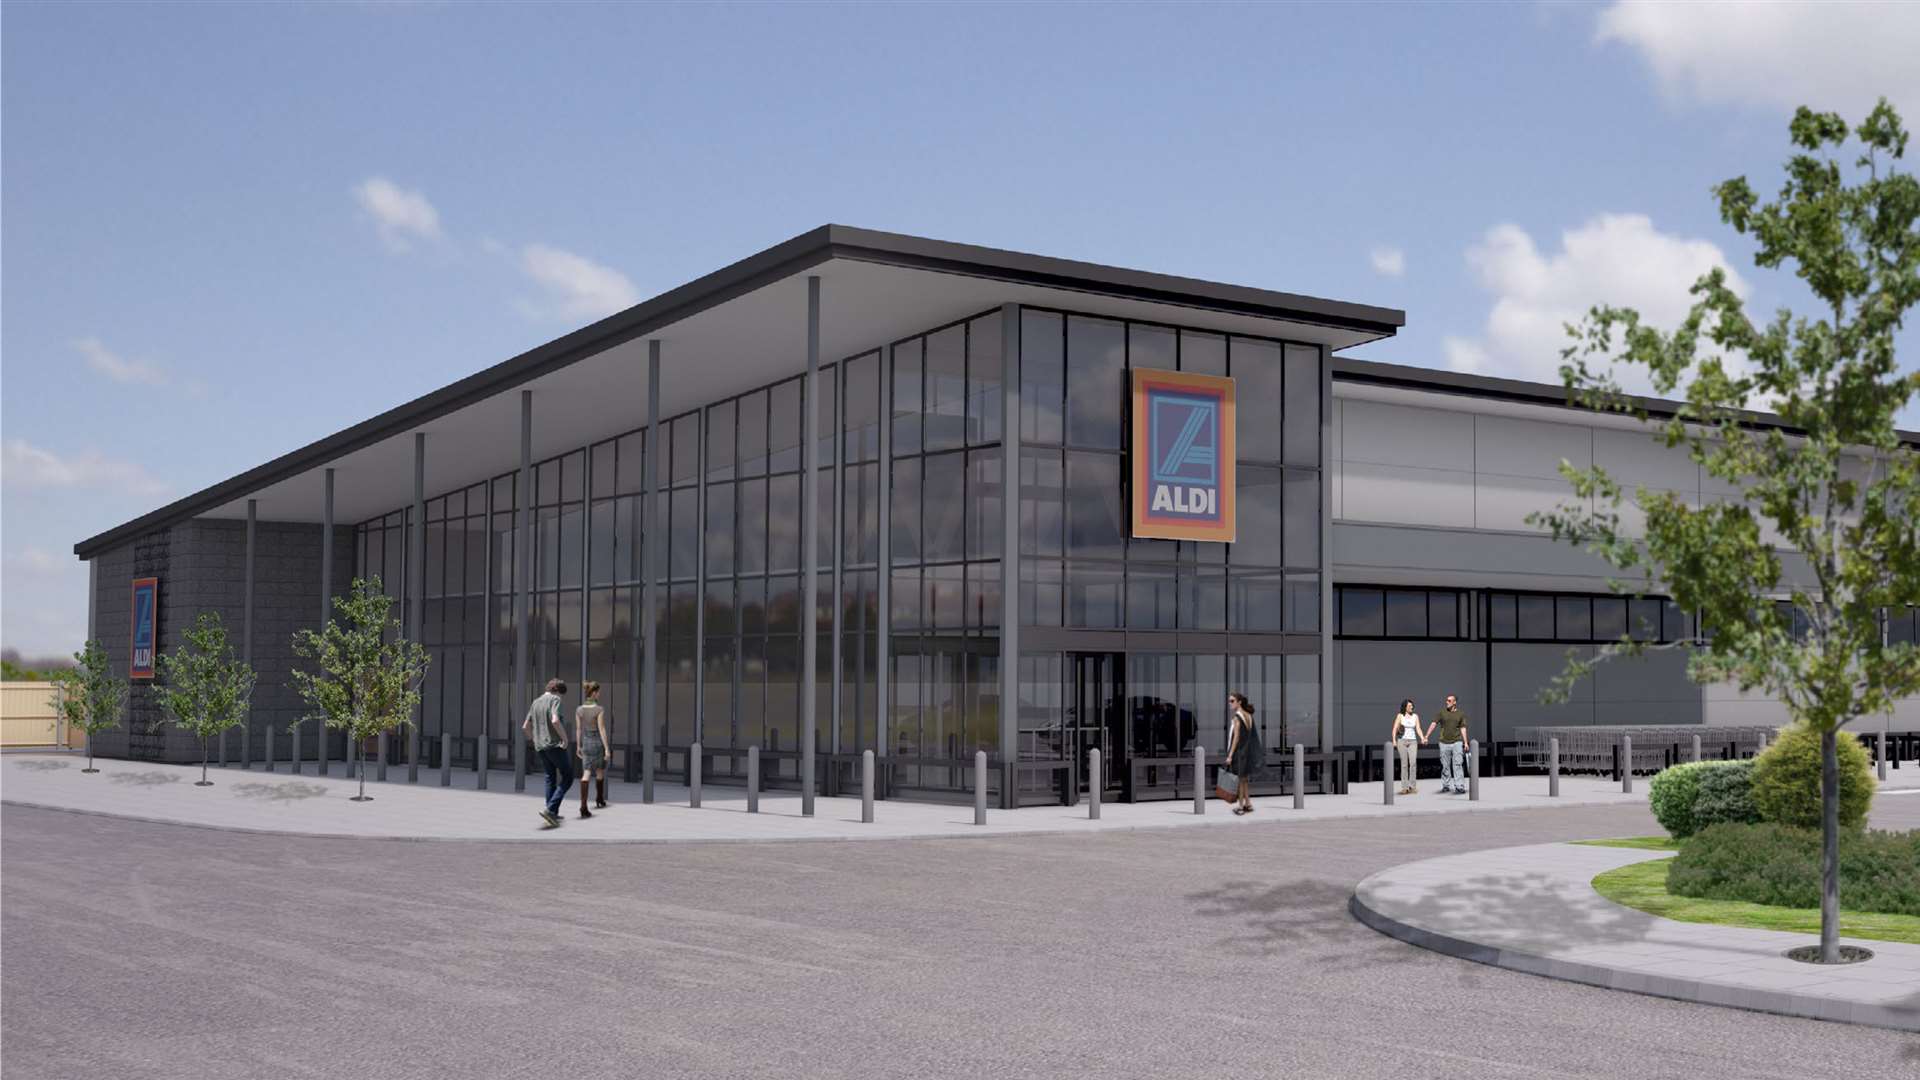 A large Aldi is included in the plans